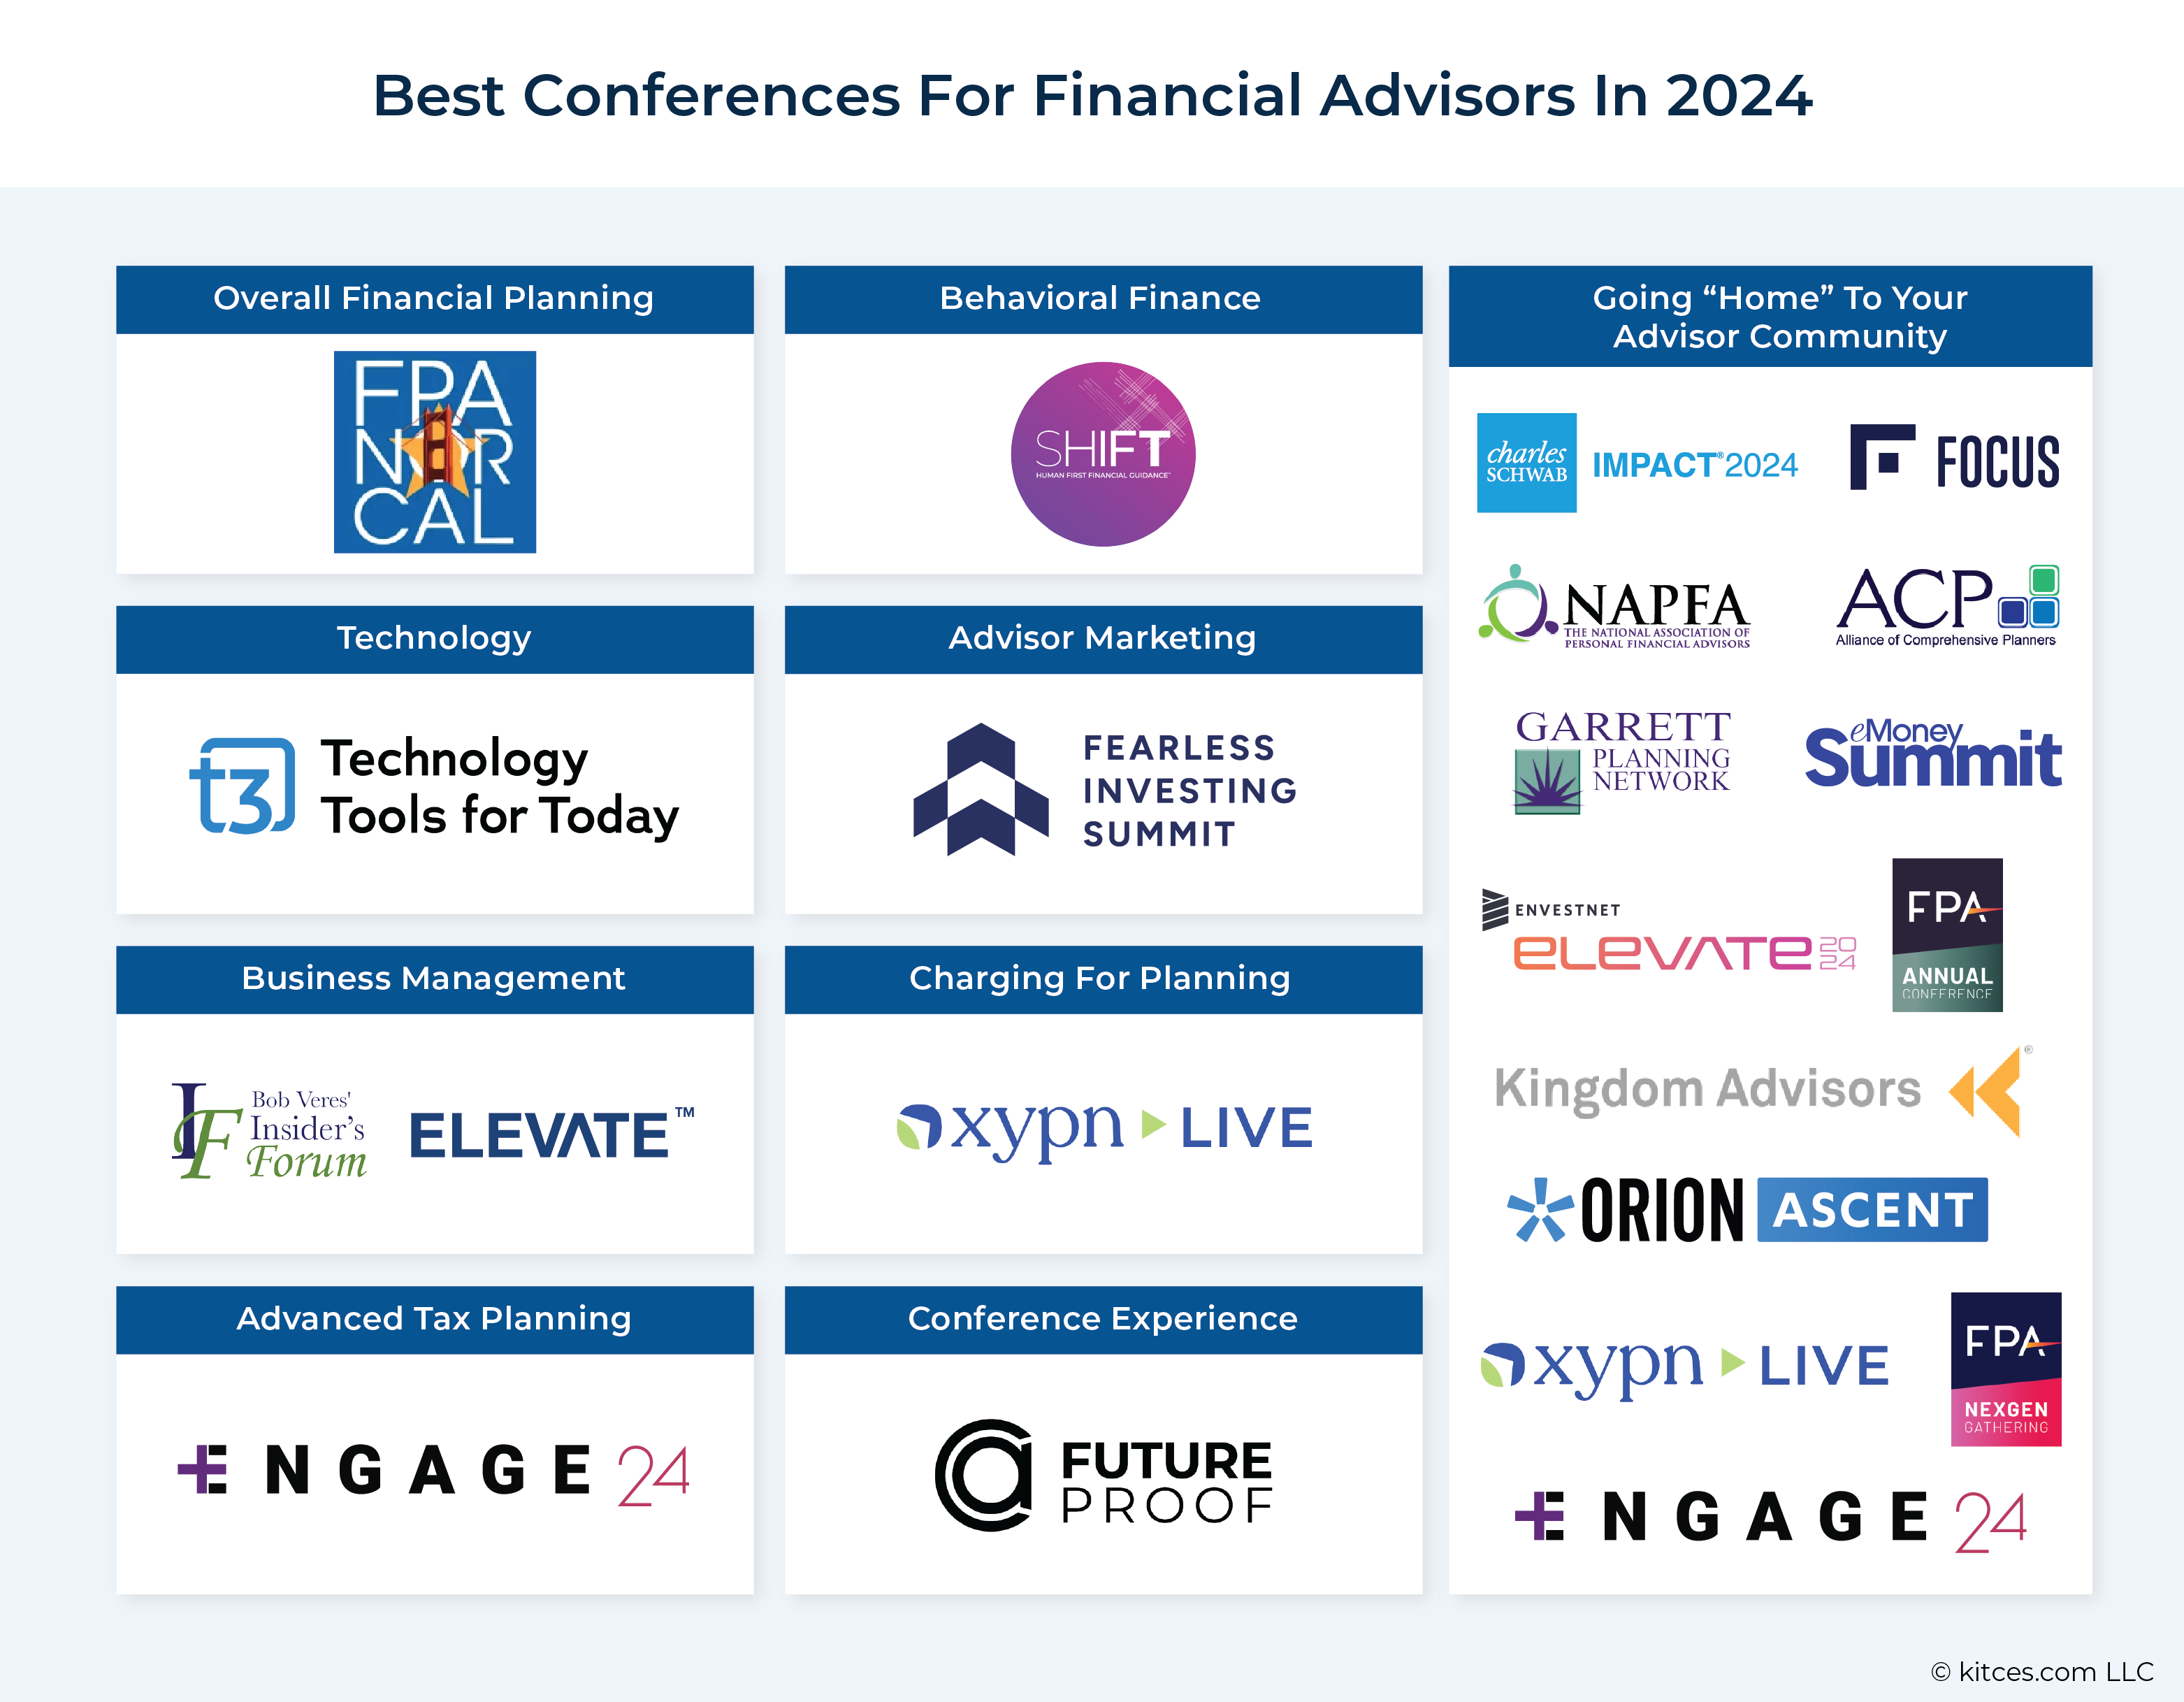 The 10 Best Financial Advisor Conferences To Attend In 2024